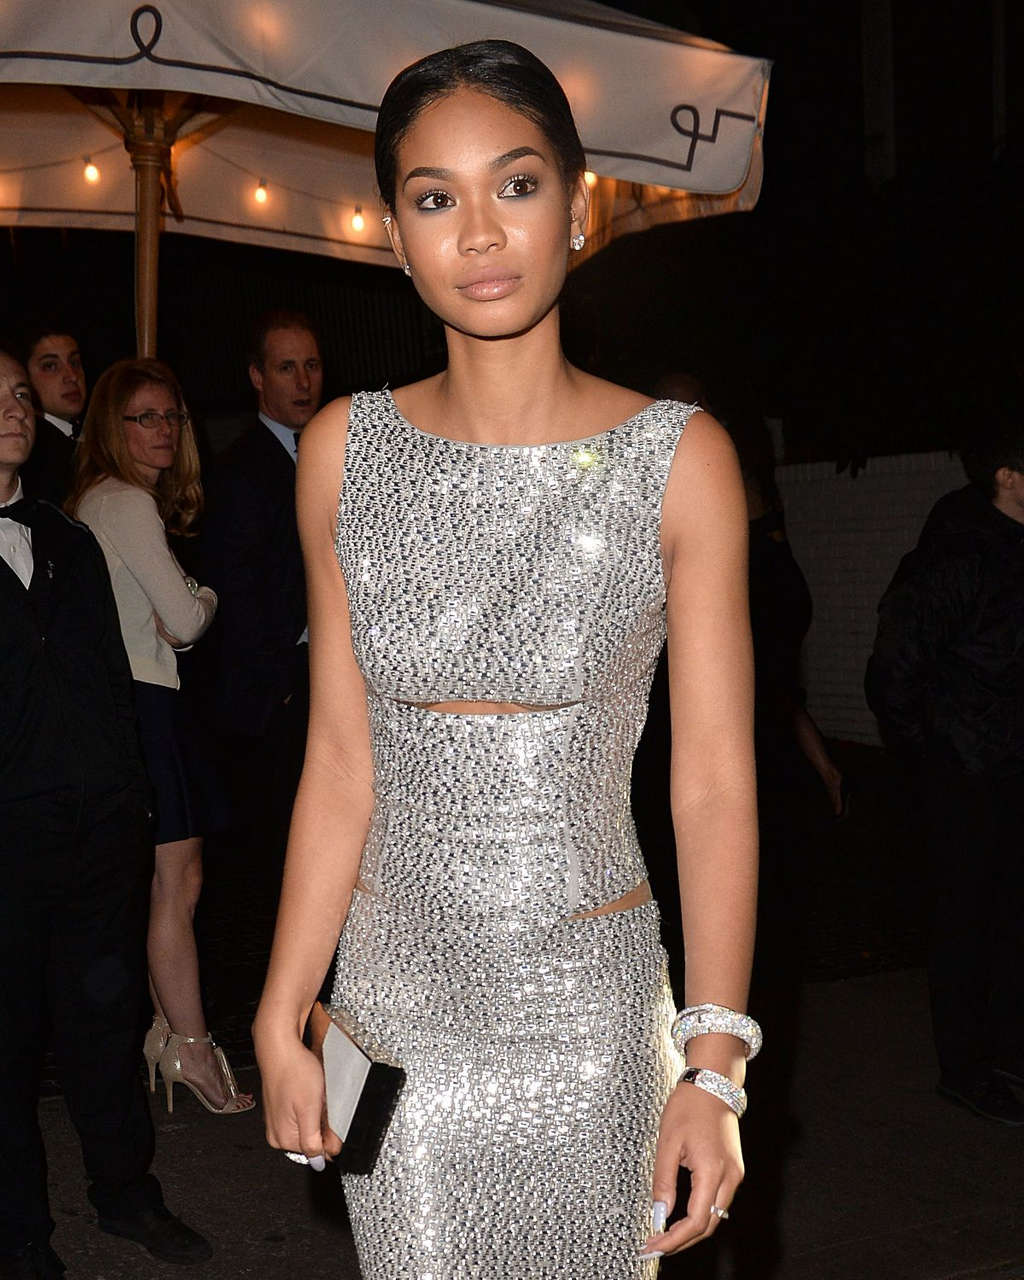 Chanel Iman Ay Wma Golden Globes Party Chateau Marmont Los Angeles